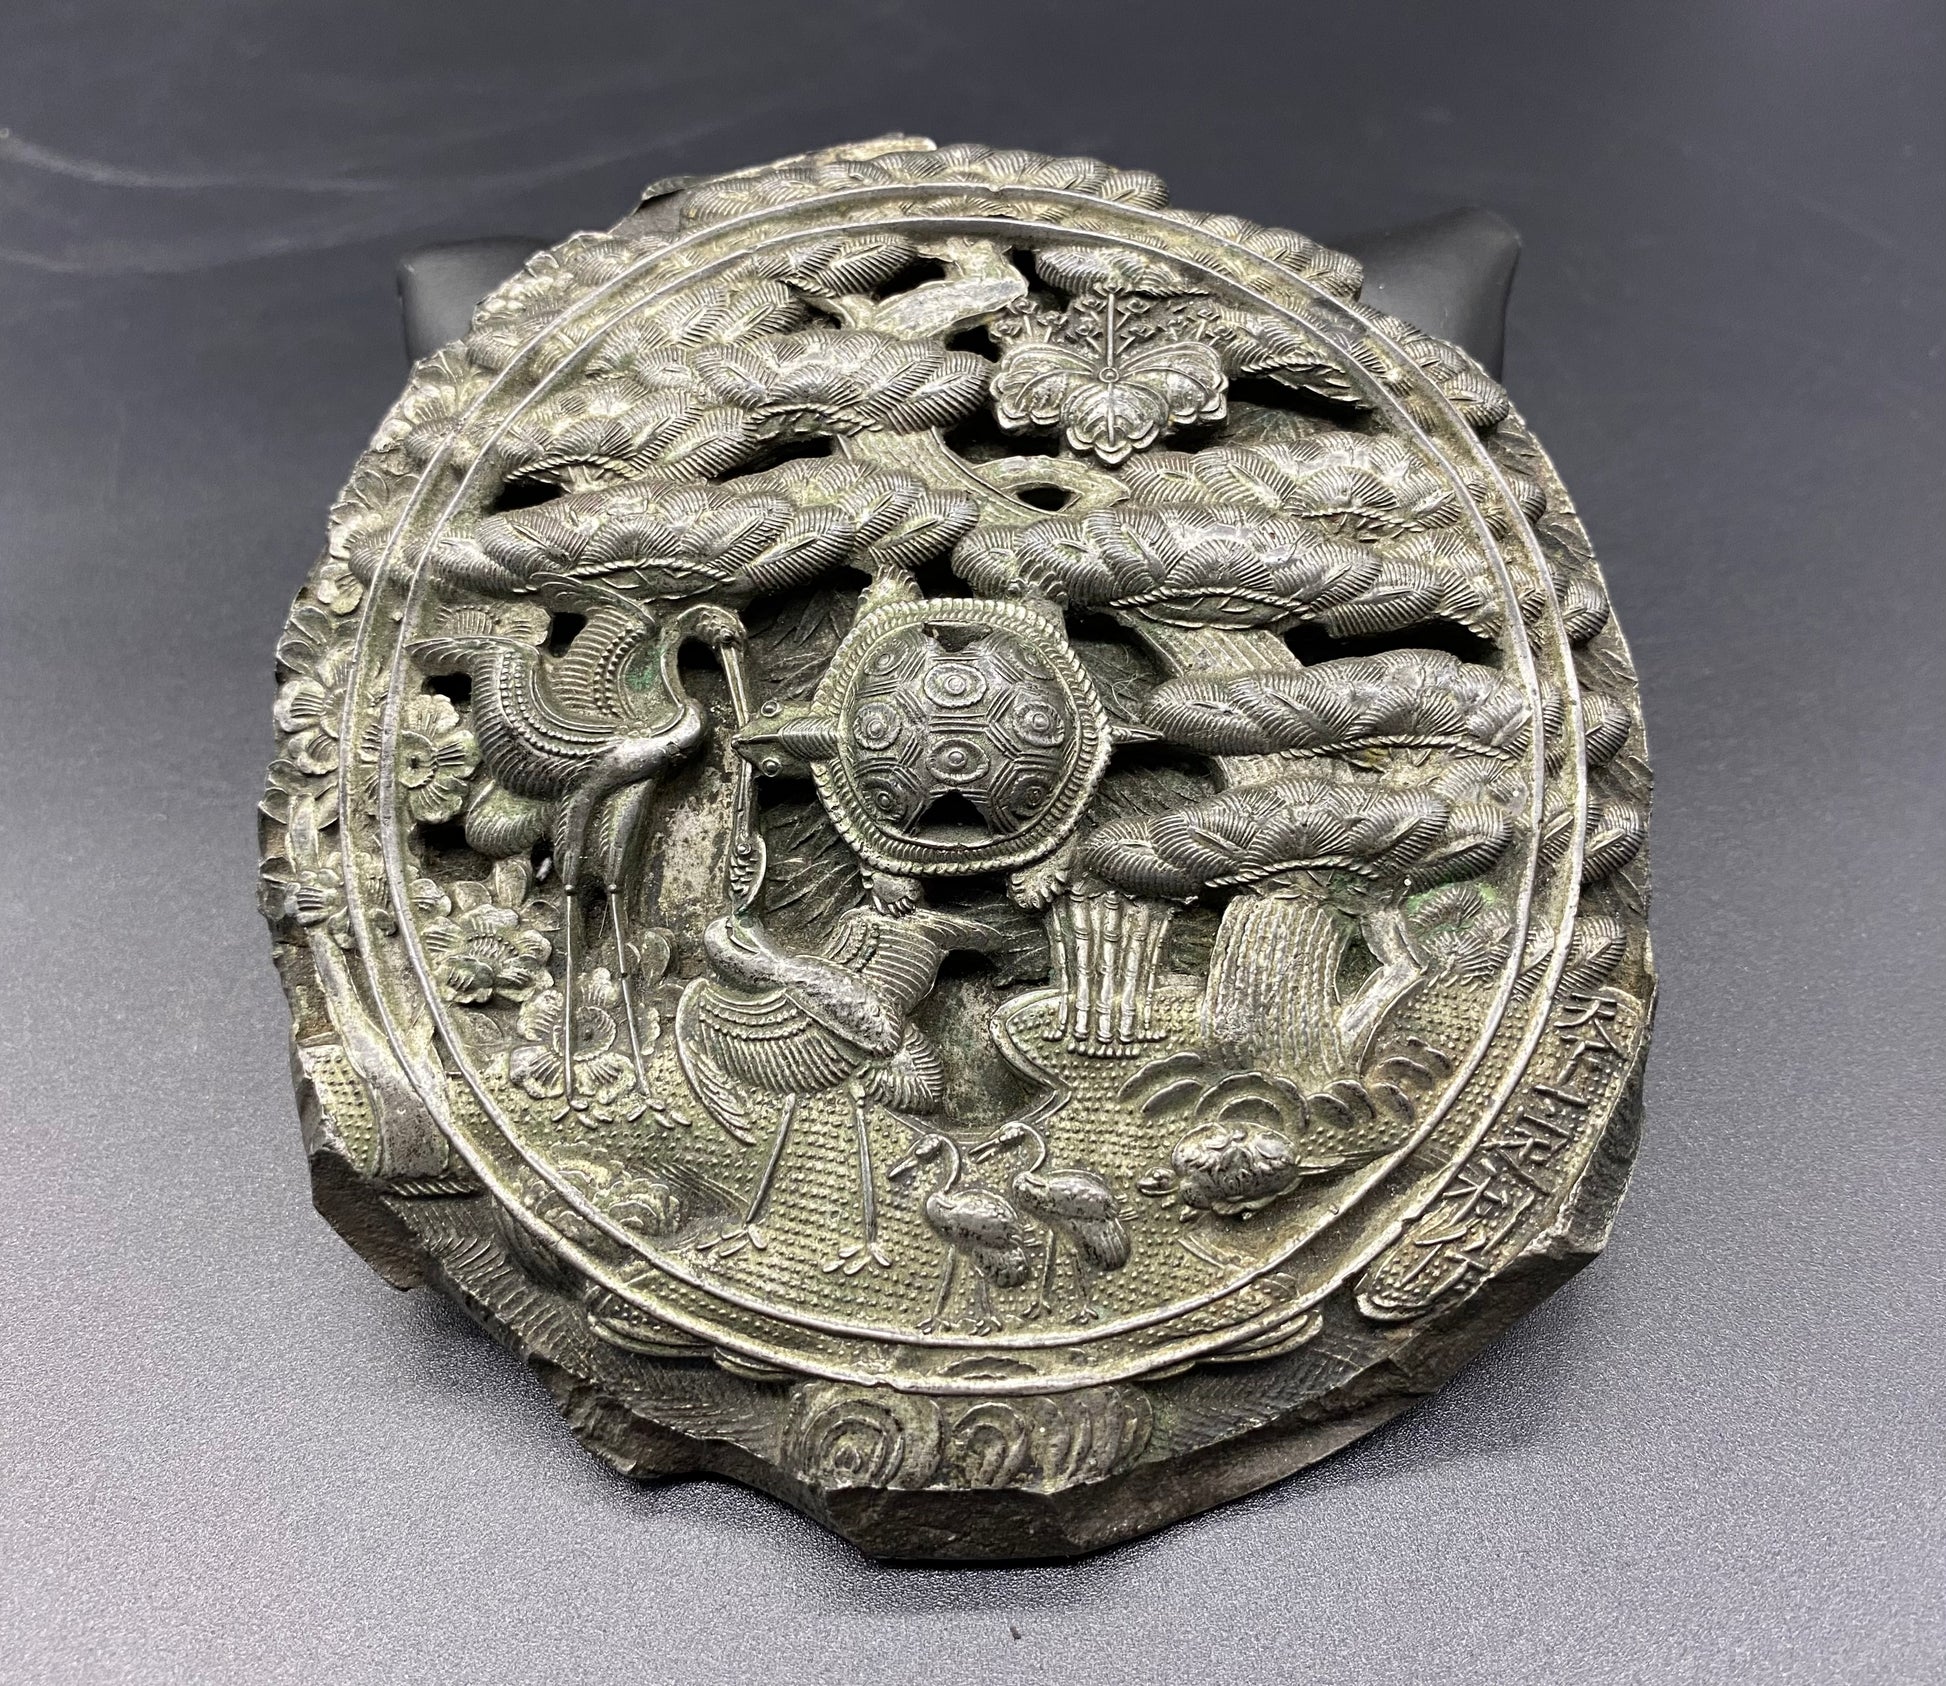 A heavy and finely cast Japanese bronze mirror with longevity symbols, Edo Period, 18th century, Japan. The round mirror has been intricately and exquisitely cast with symbols of longevity.